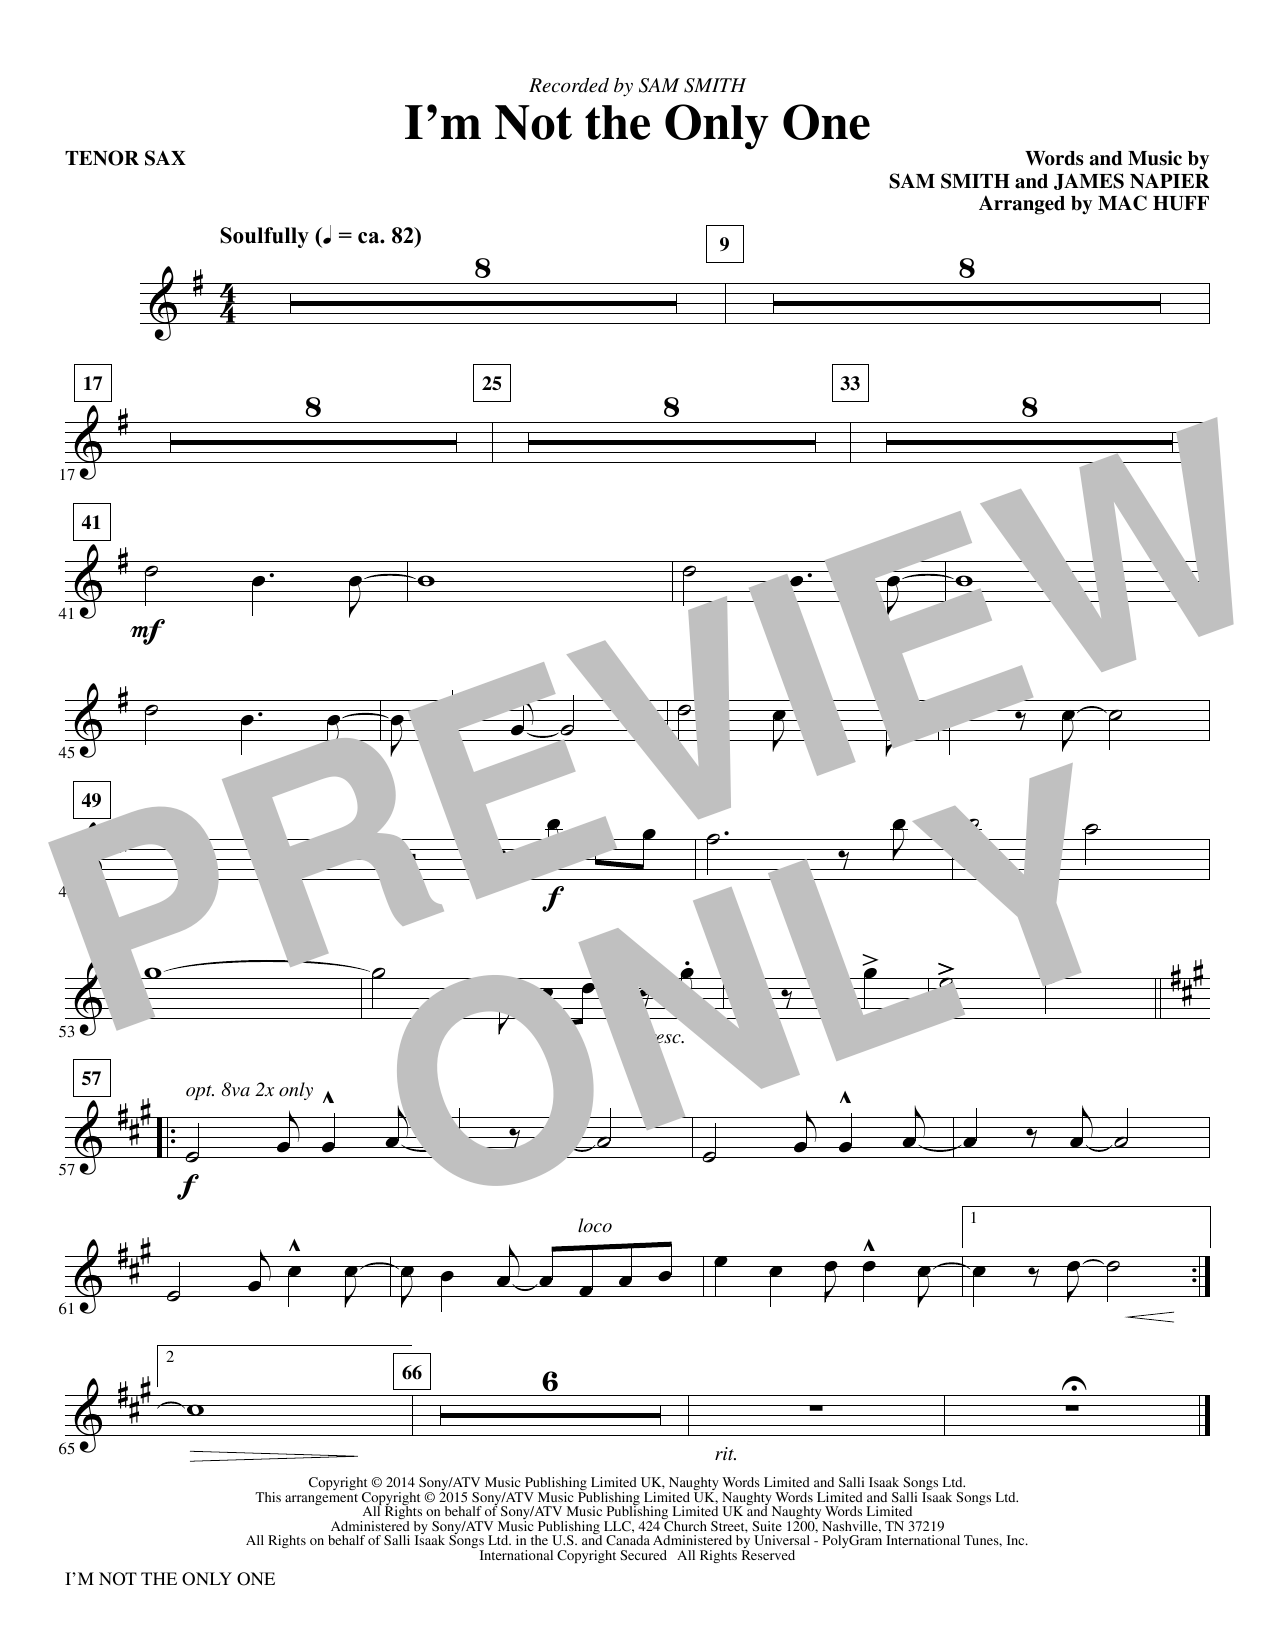 Mac Huff I'm Not the Only One - Bb Tenor Saxophone sheet music notes and chords. Download Printable PDF.